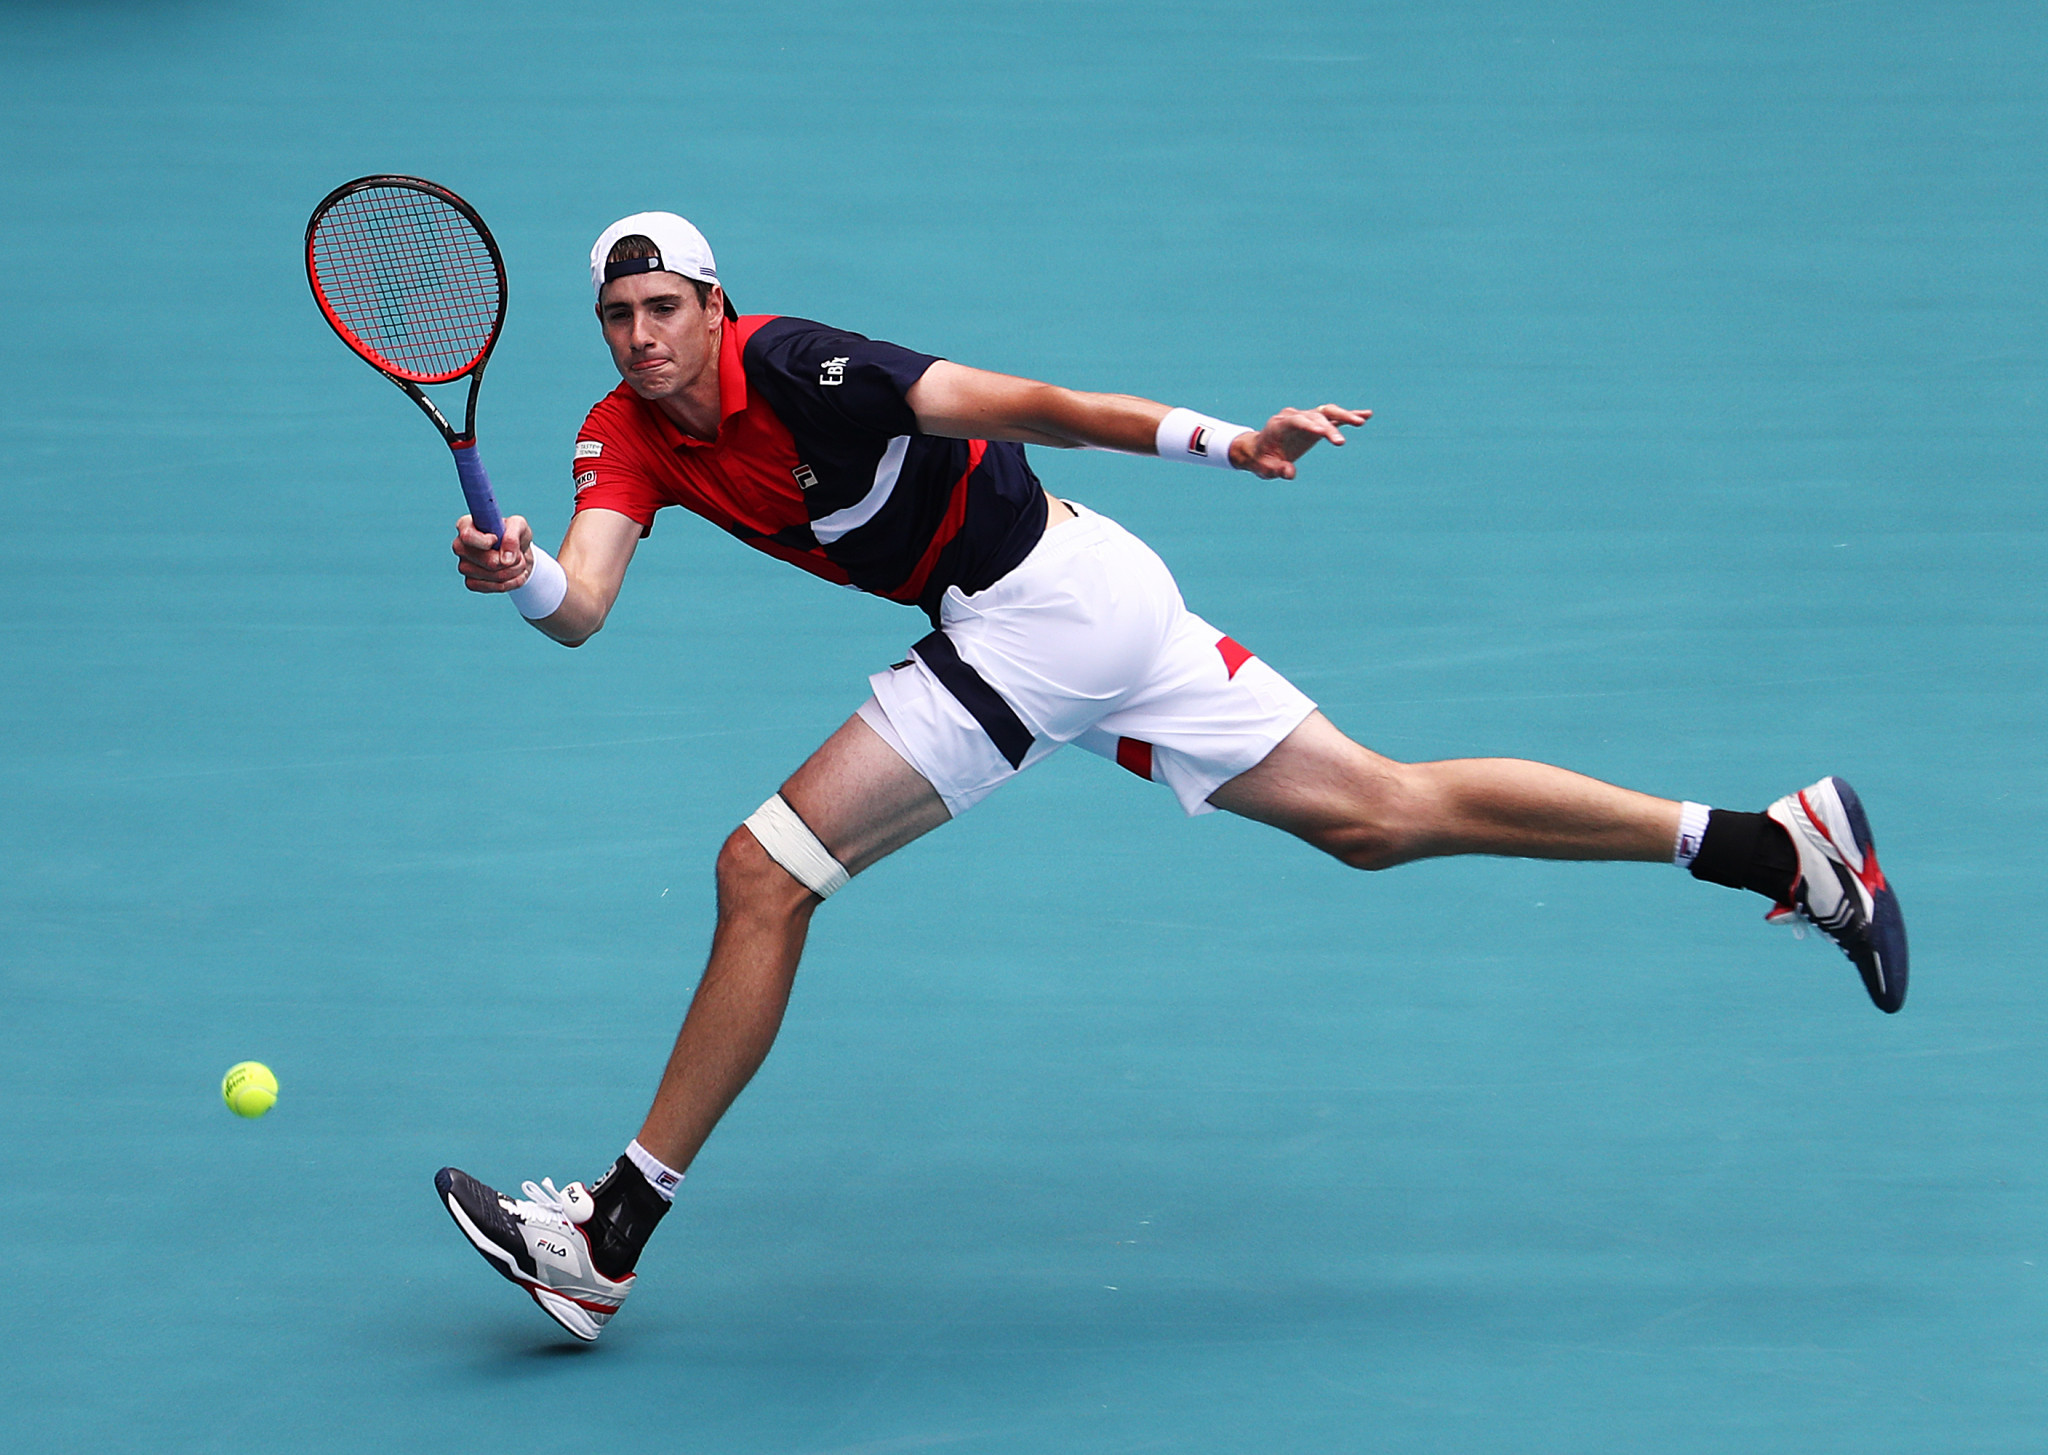 Defending champion John Isner progressed to the final of the Miami Open ©Getty Images